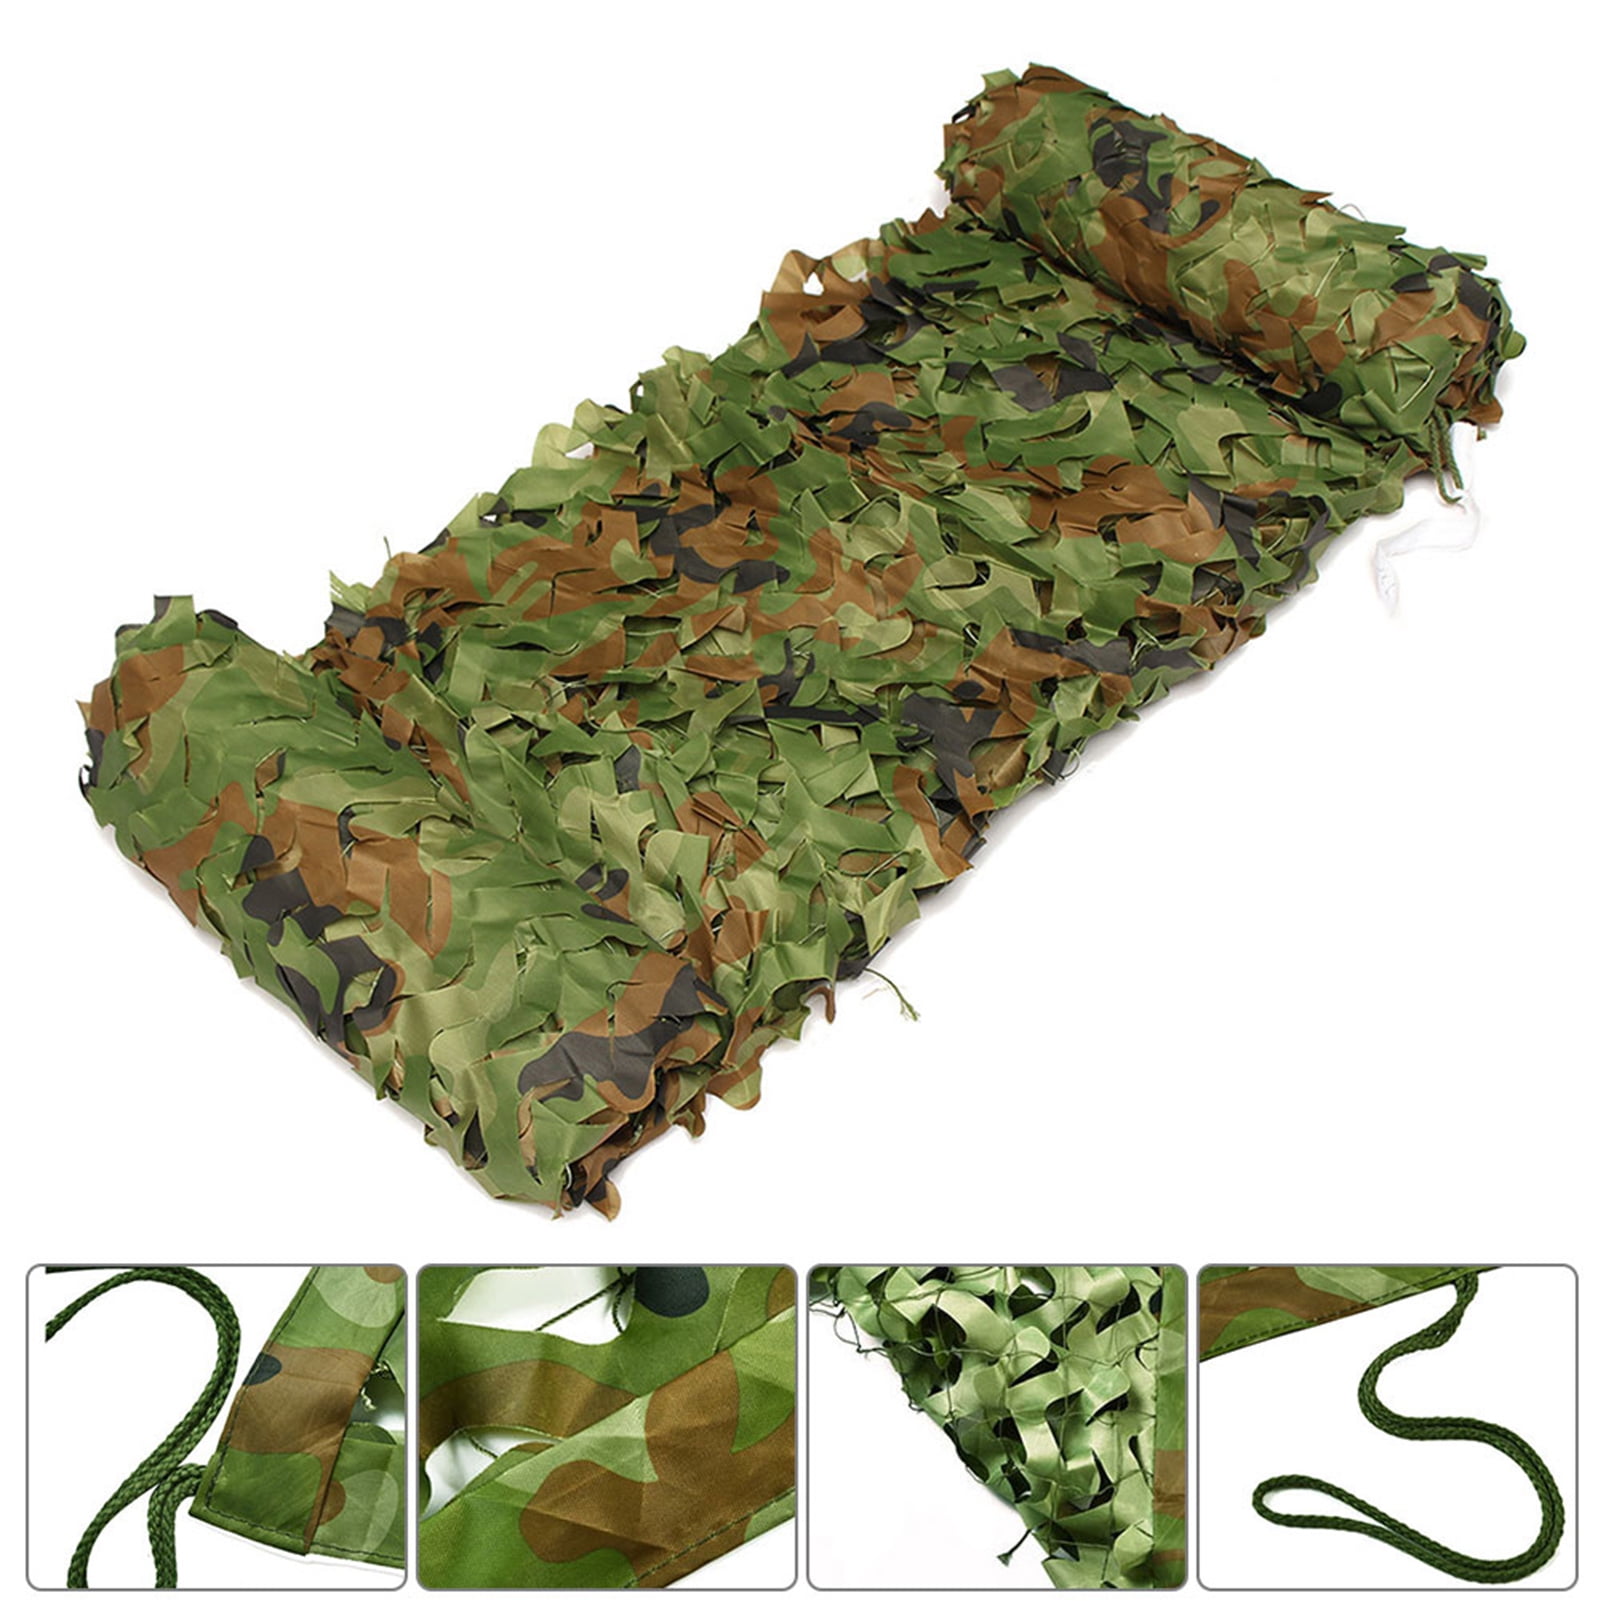 Details about   Camouflage Army Green Net Netting Camo Camping Military Hunting Woodland Leaves 